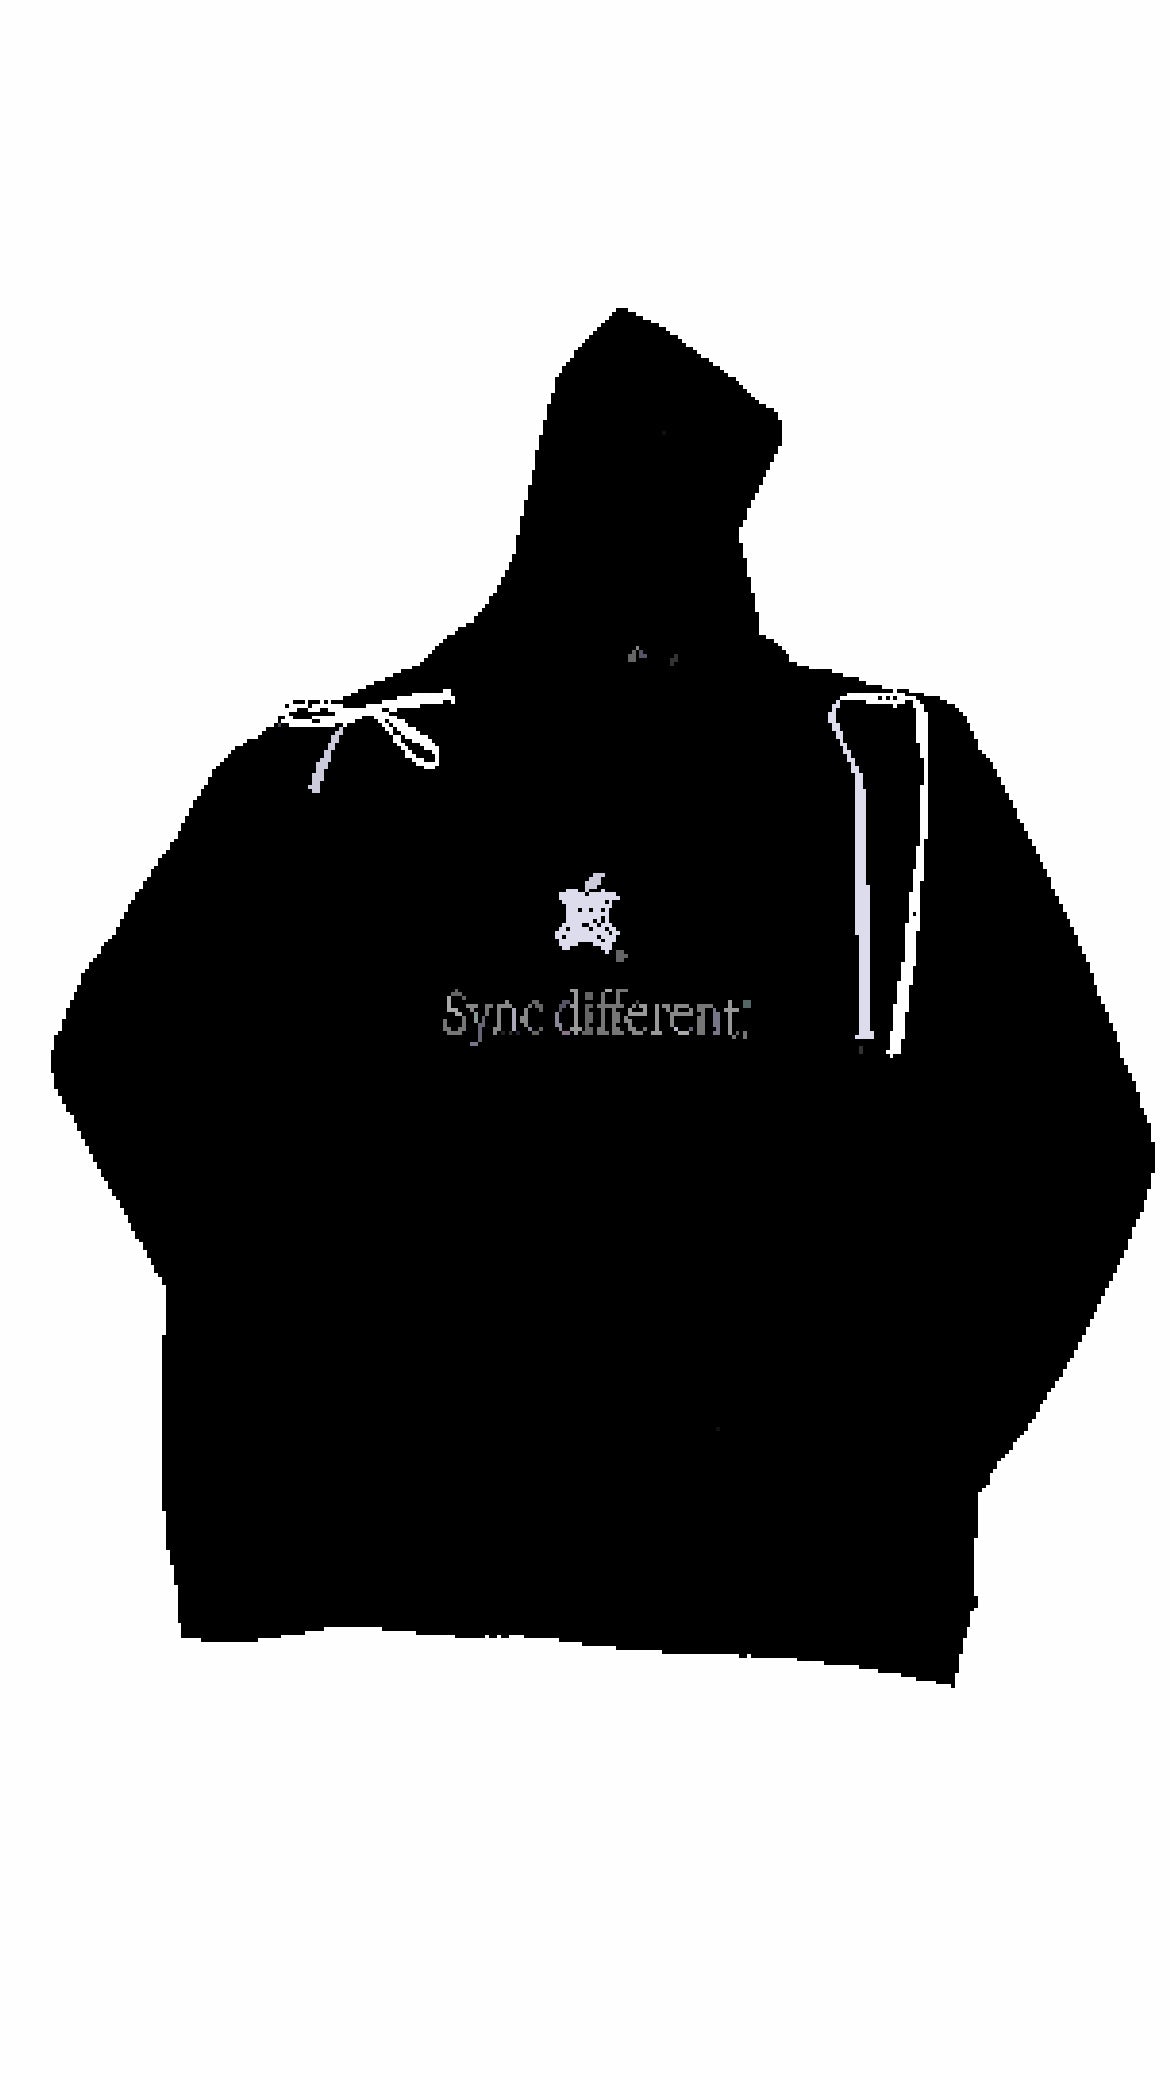 ***NEW DROP*** - ®SyncDifferent